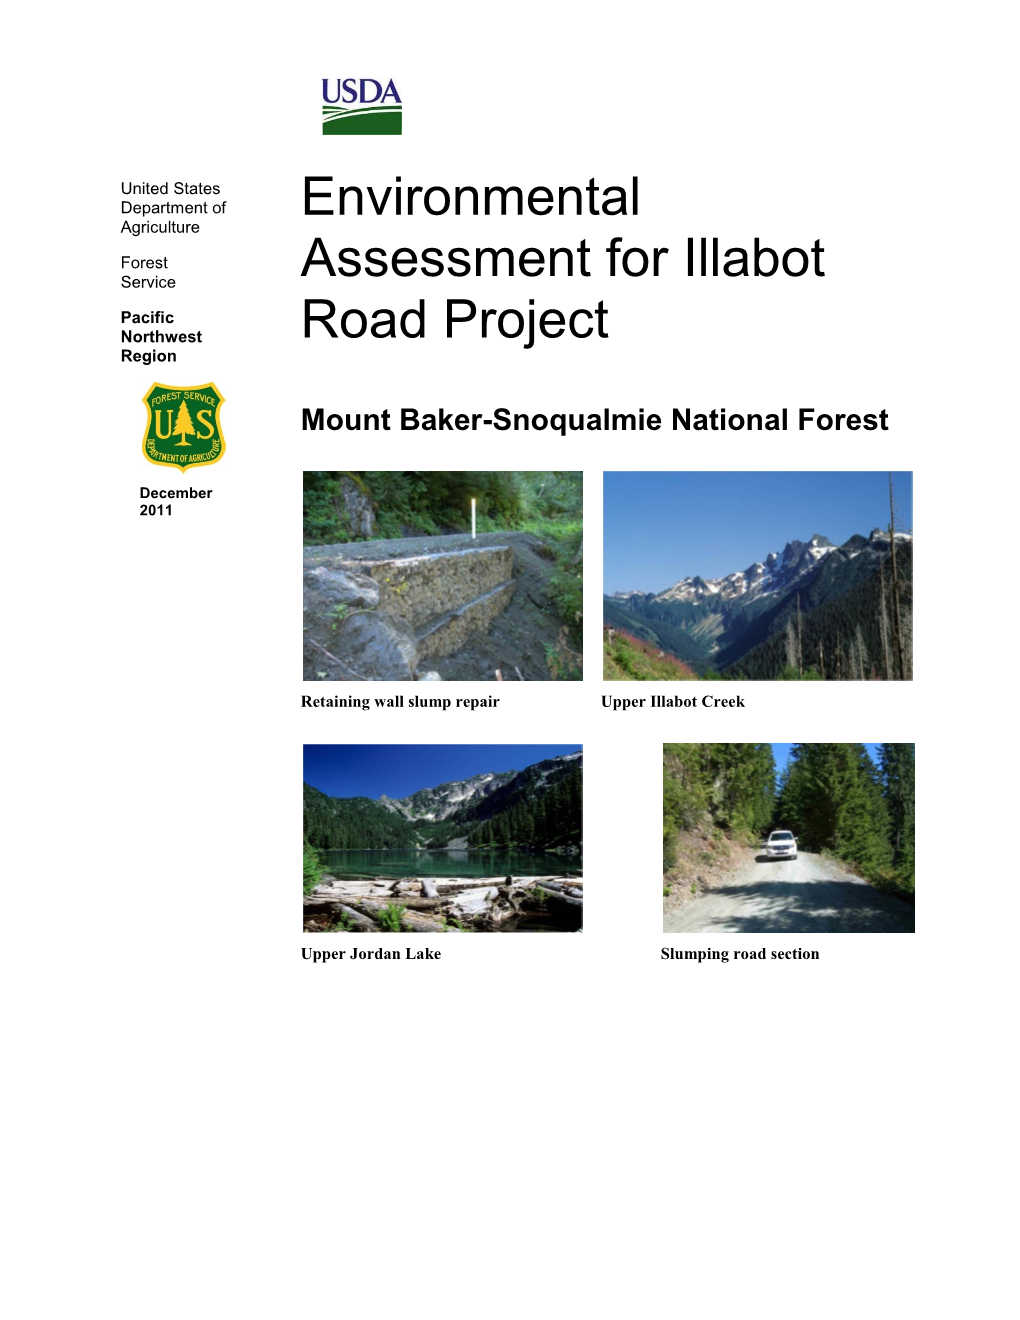 Environmental Assessment for Illabot Road Project